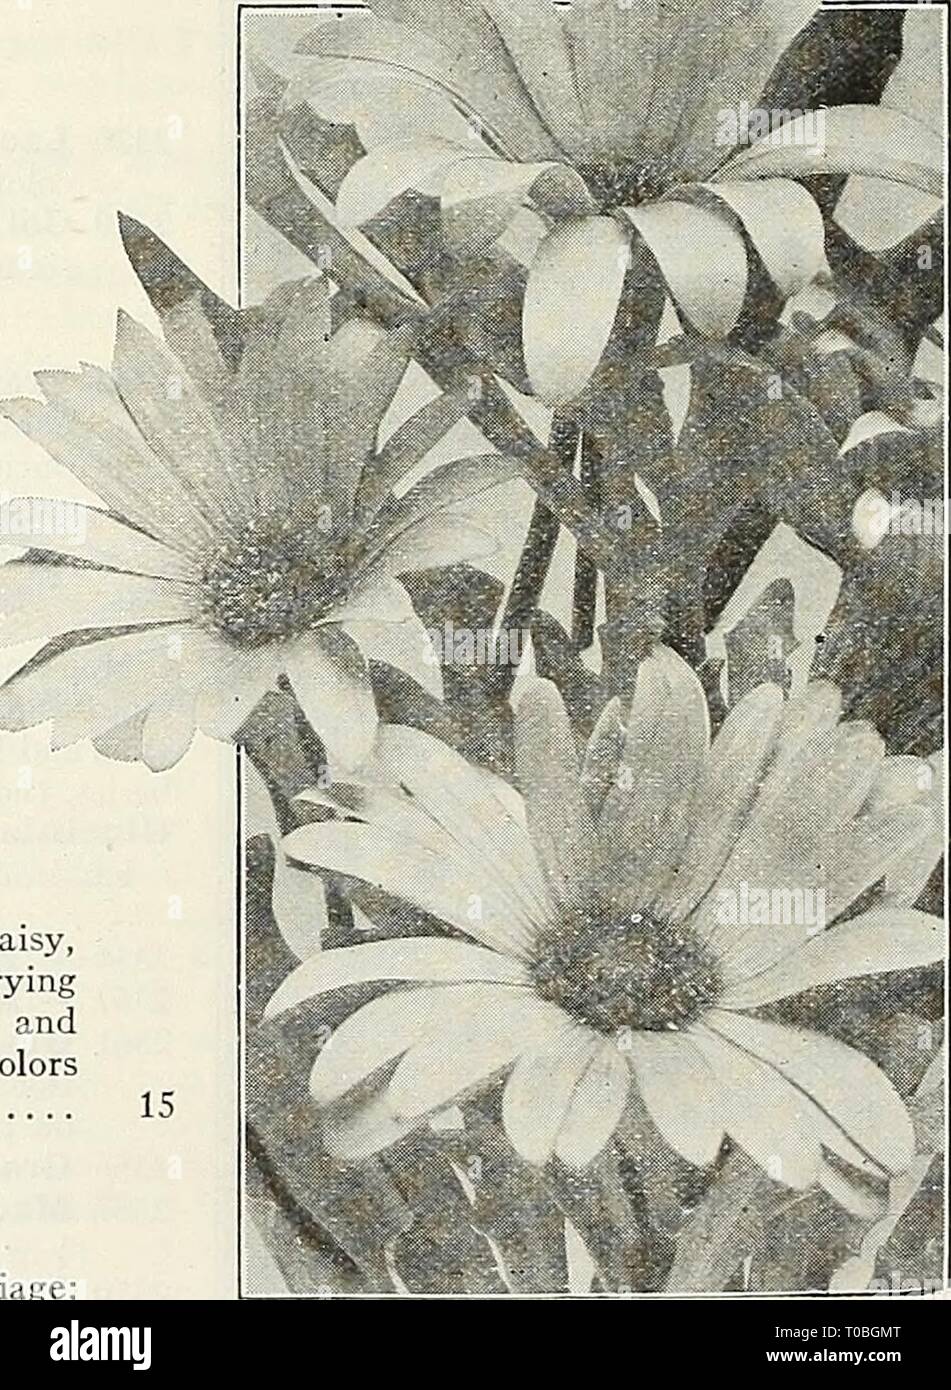 Dreer's garden book 1926 (1926) Dreer's garden book 1926 dreersgardenbook1926henr Year: 1926  2376 s/^: ' r. M' / r f /•• DiDiscus (Blue Lace Flower) DidiSCUS (Blue Lace Flower) 2351 Coeruleus. This pretty and interesting annual blooms most profusely from July tUl November; also used exten- sively for early spring flowering in a cool greenhouse; their exquisite pale lavender blossoms are excellent for cutting; plants grow about 18 inches high, and have as many as 50 flowers open at one time. (See cut.) 2 pkts., 25 cts $0 15 DimOrphotheCa (African Colden Daisy) 2375 Aurantiaca. An extremely sho Stock Photo